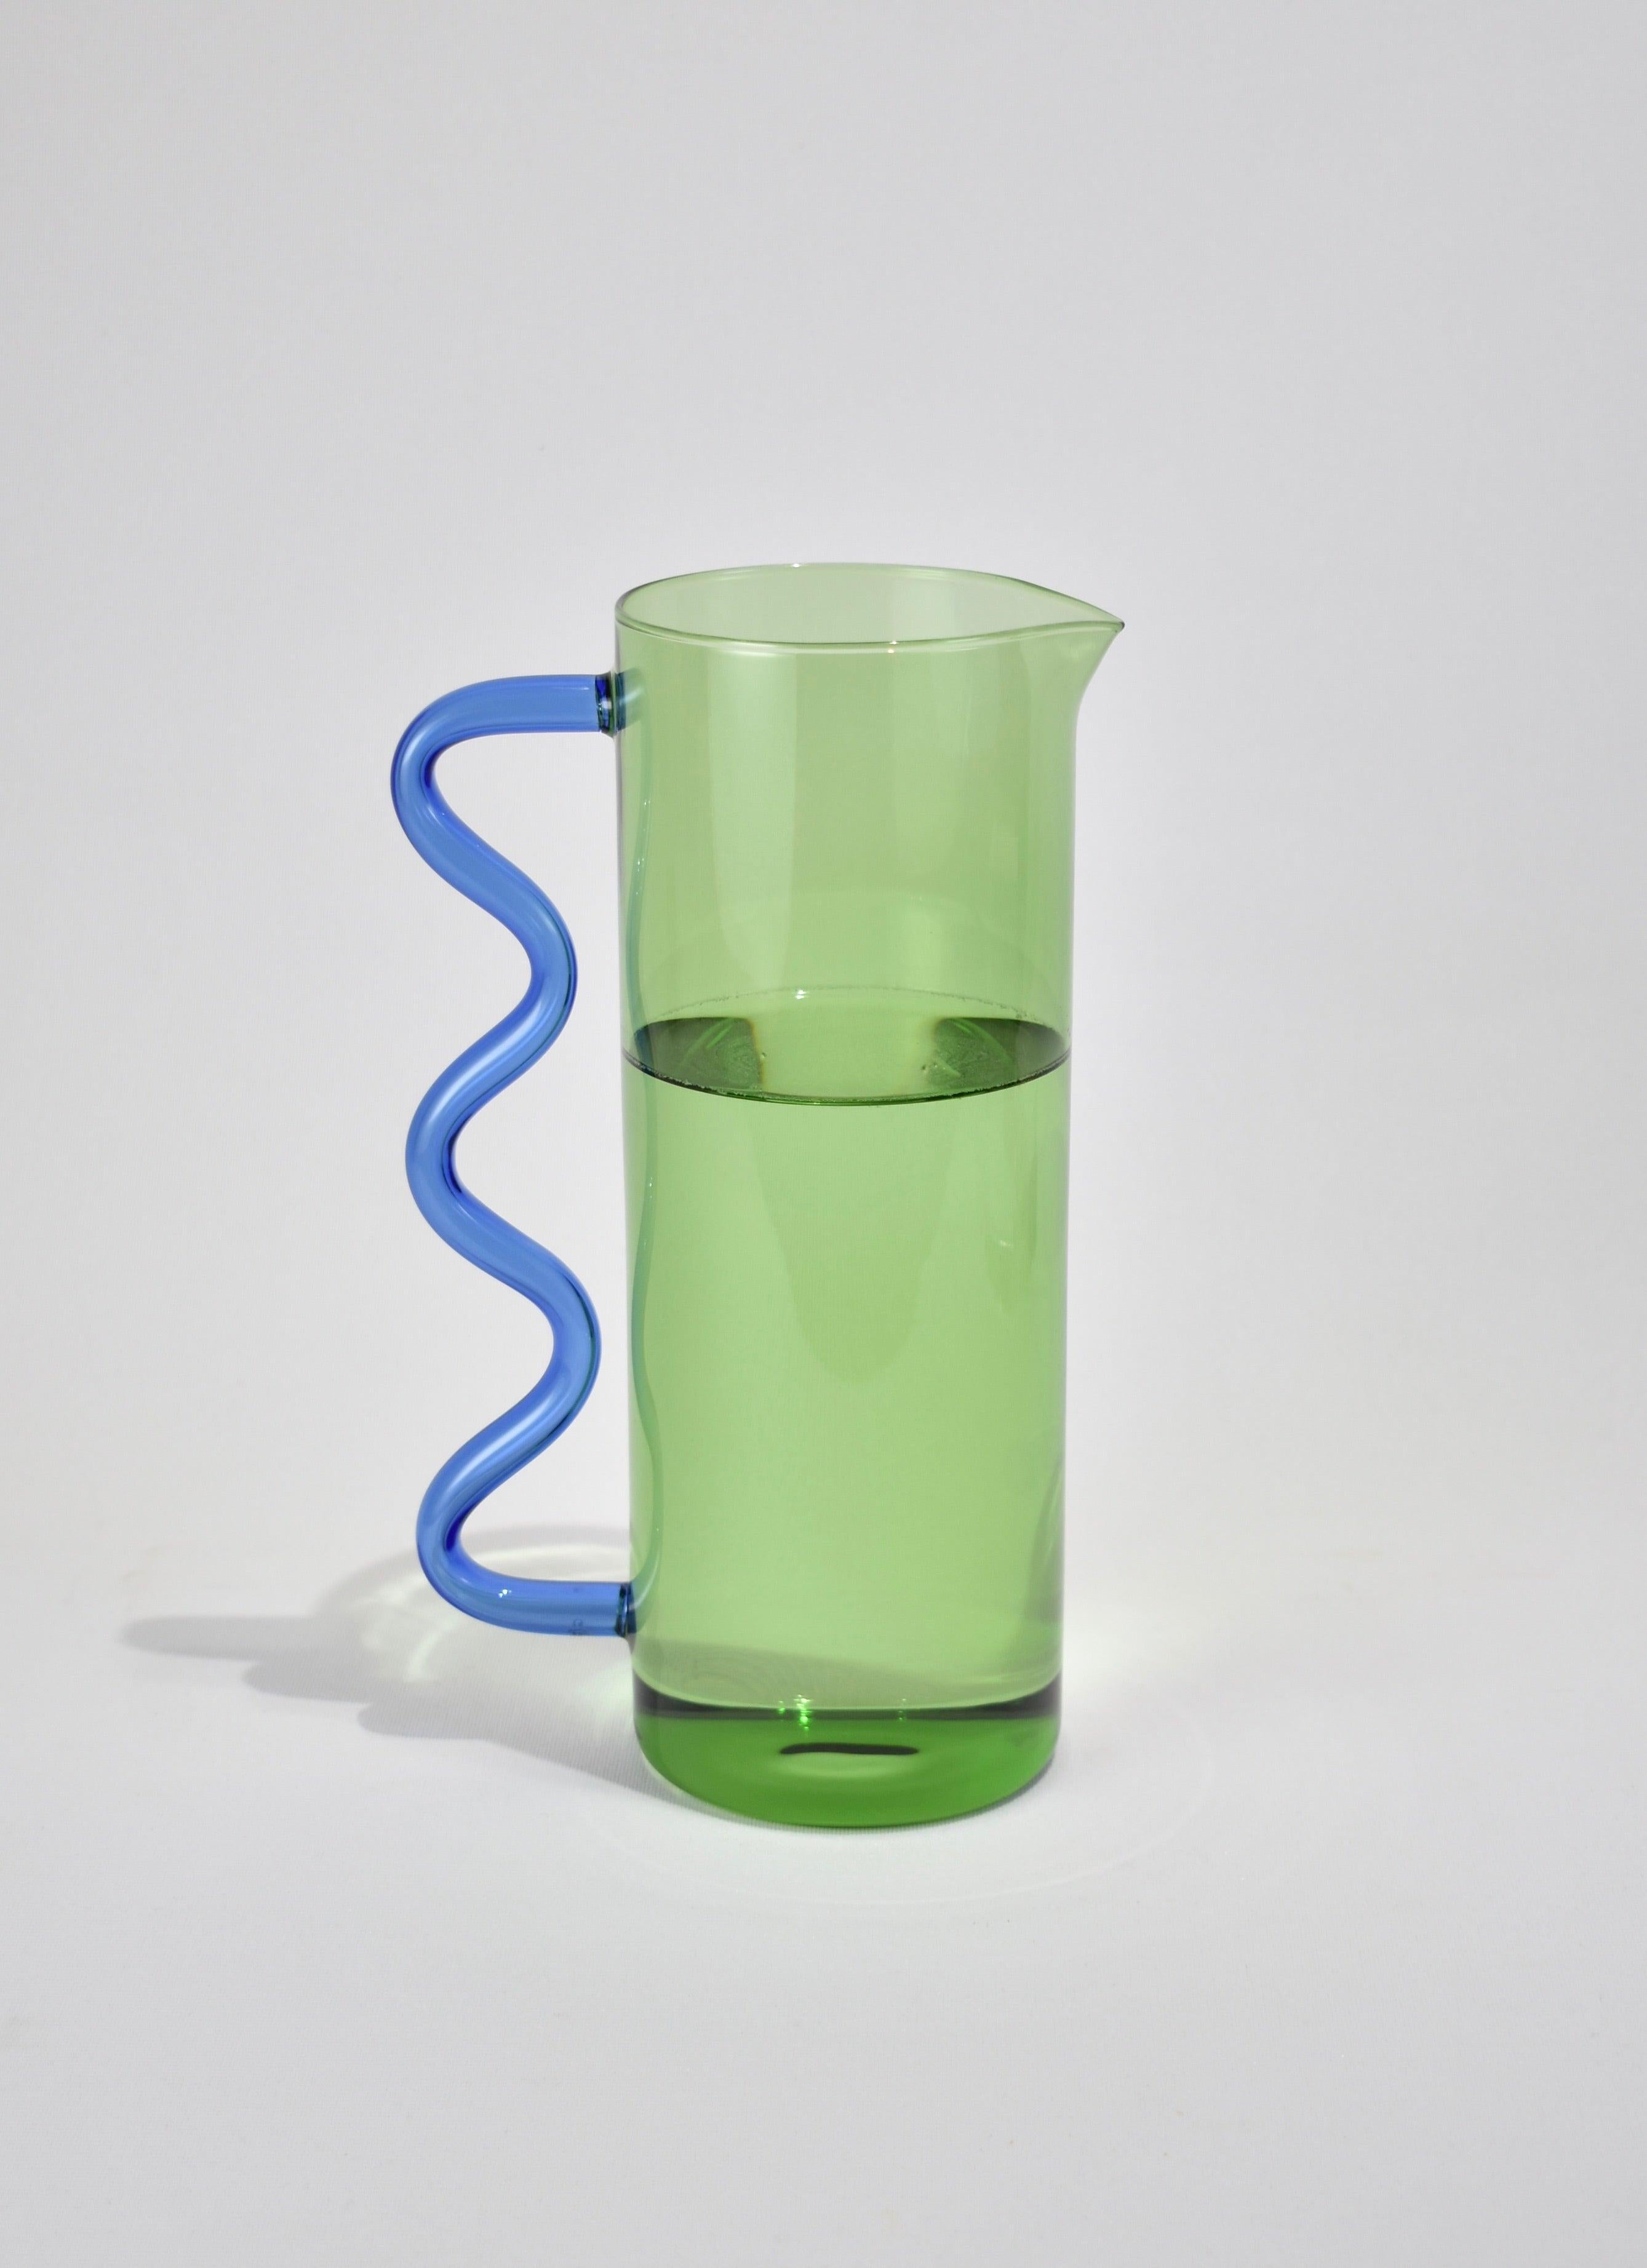 A glass pitcher in green with a blue wavy handle. May be used for holding flowers, watering plants, a pitcher for juice or any other use you can think of. Designed by Sophie Lou Jacobsen in New York.

Made of lightweight and durable borosilicate